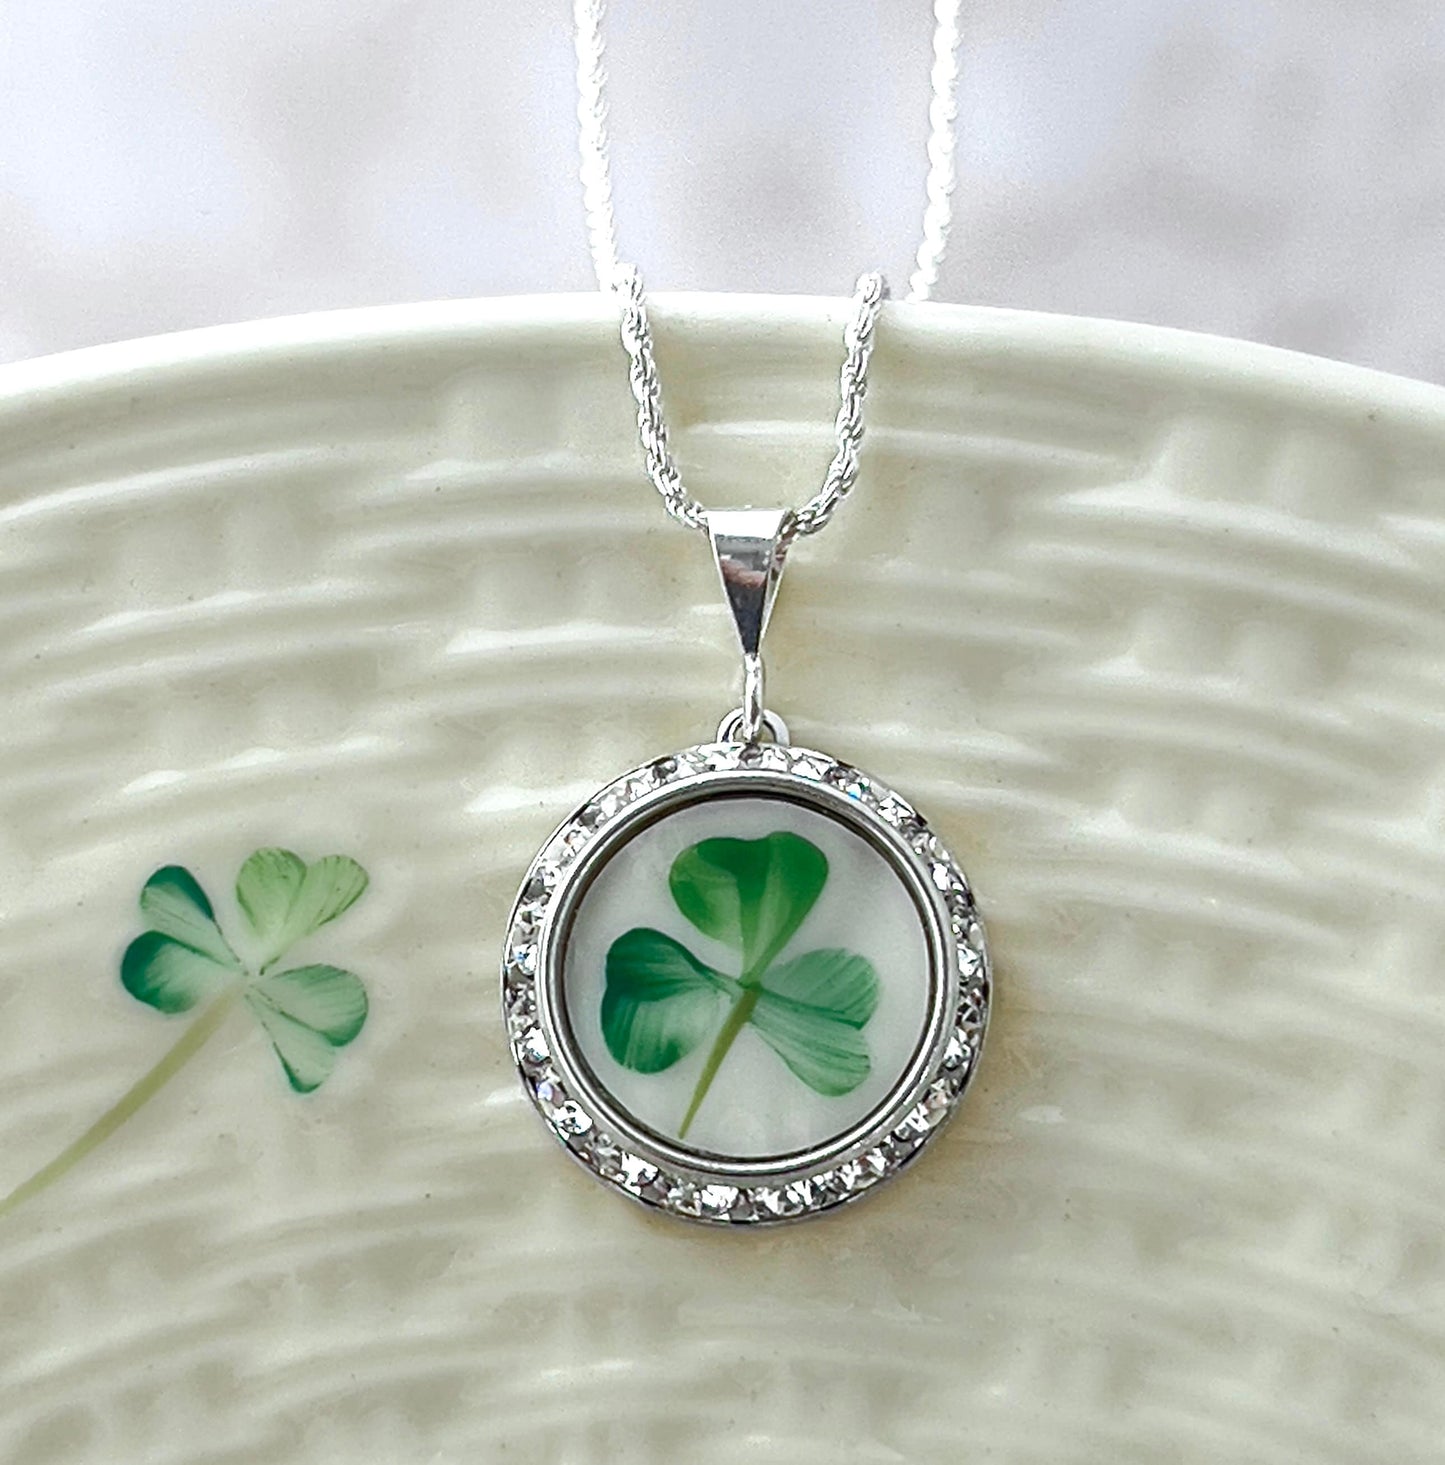 Celtic Shamrock Necklace, Belleek Broken China, Irish Jewelry, Crystal Necklace, Unique Gifts for Women